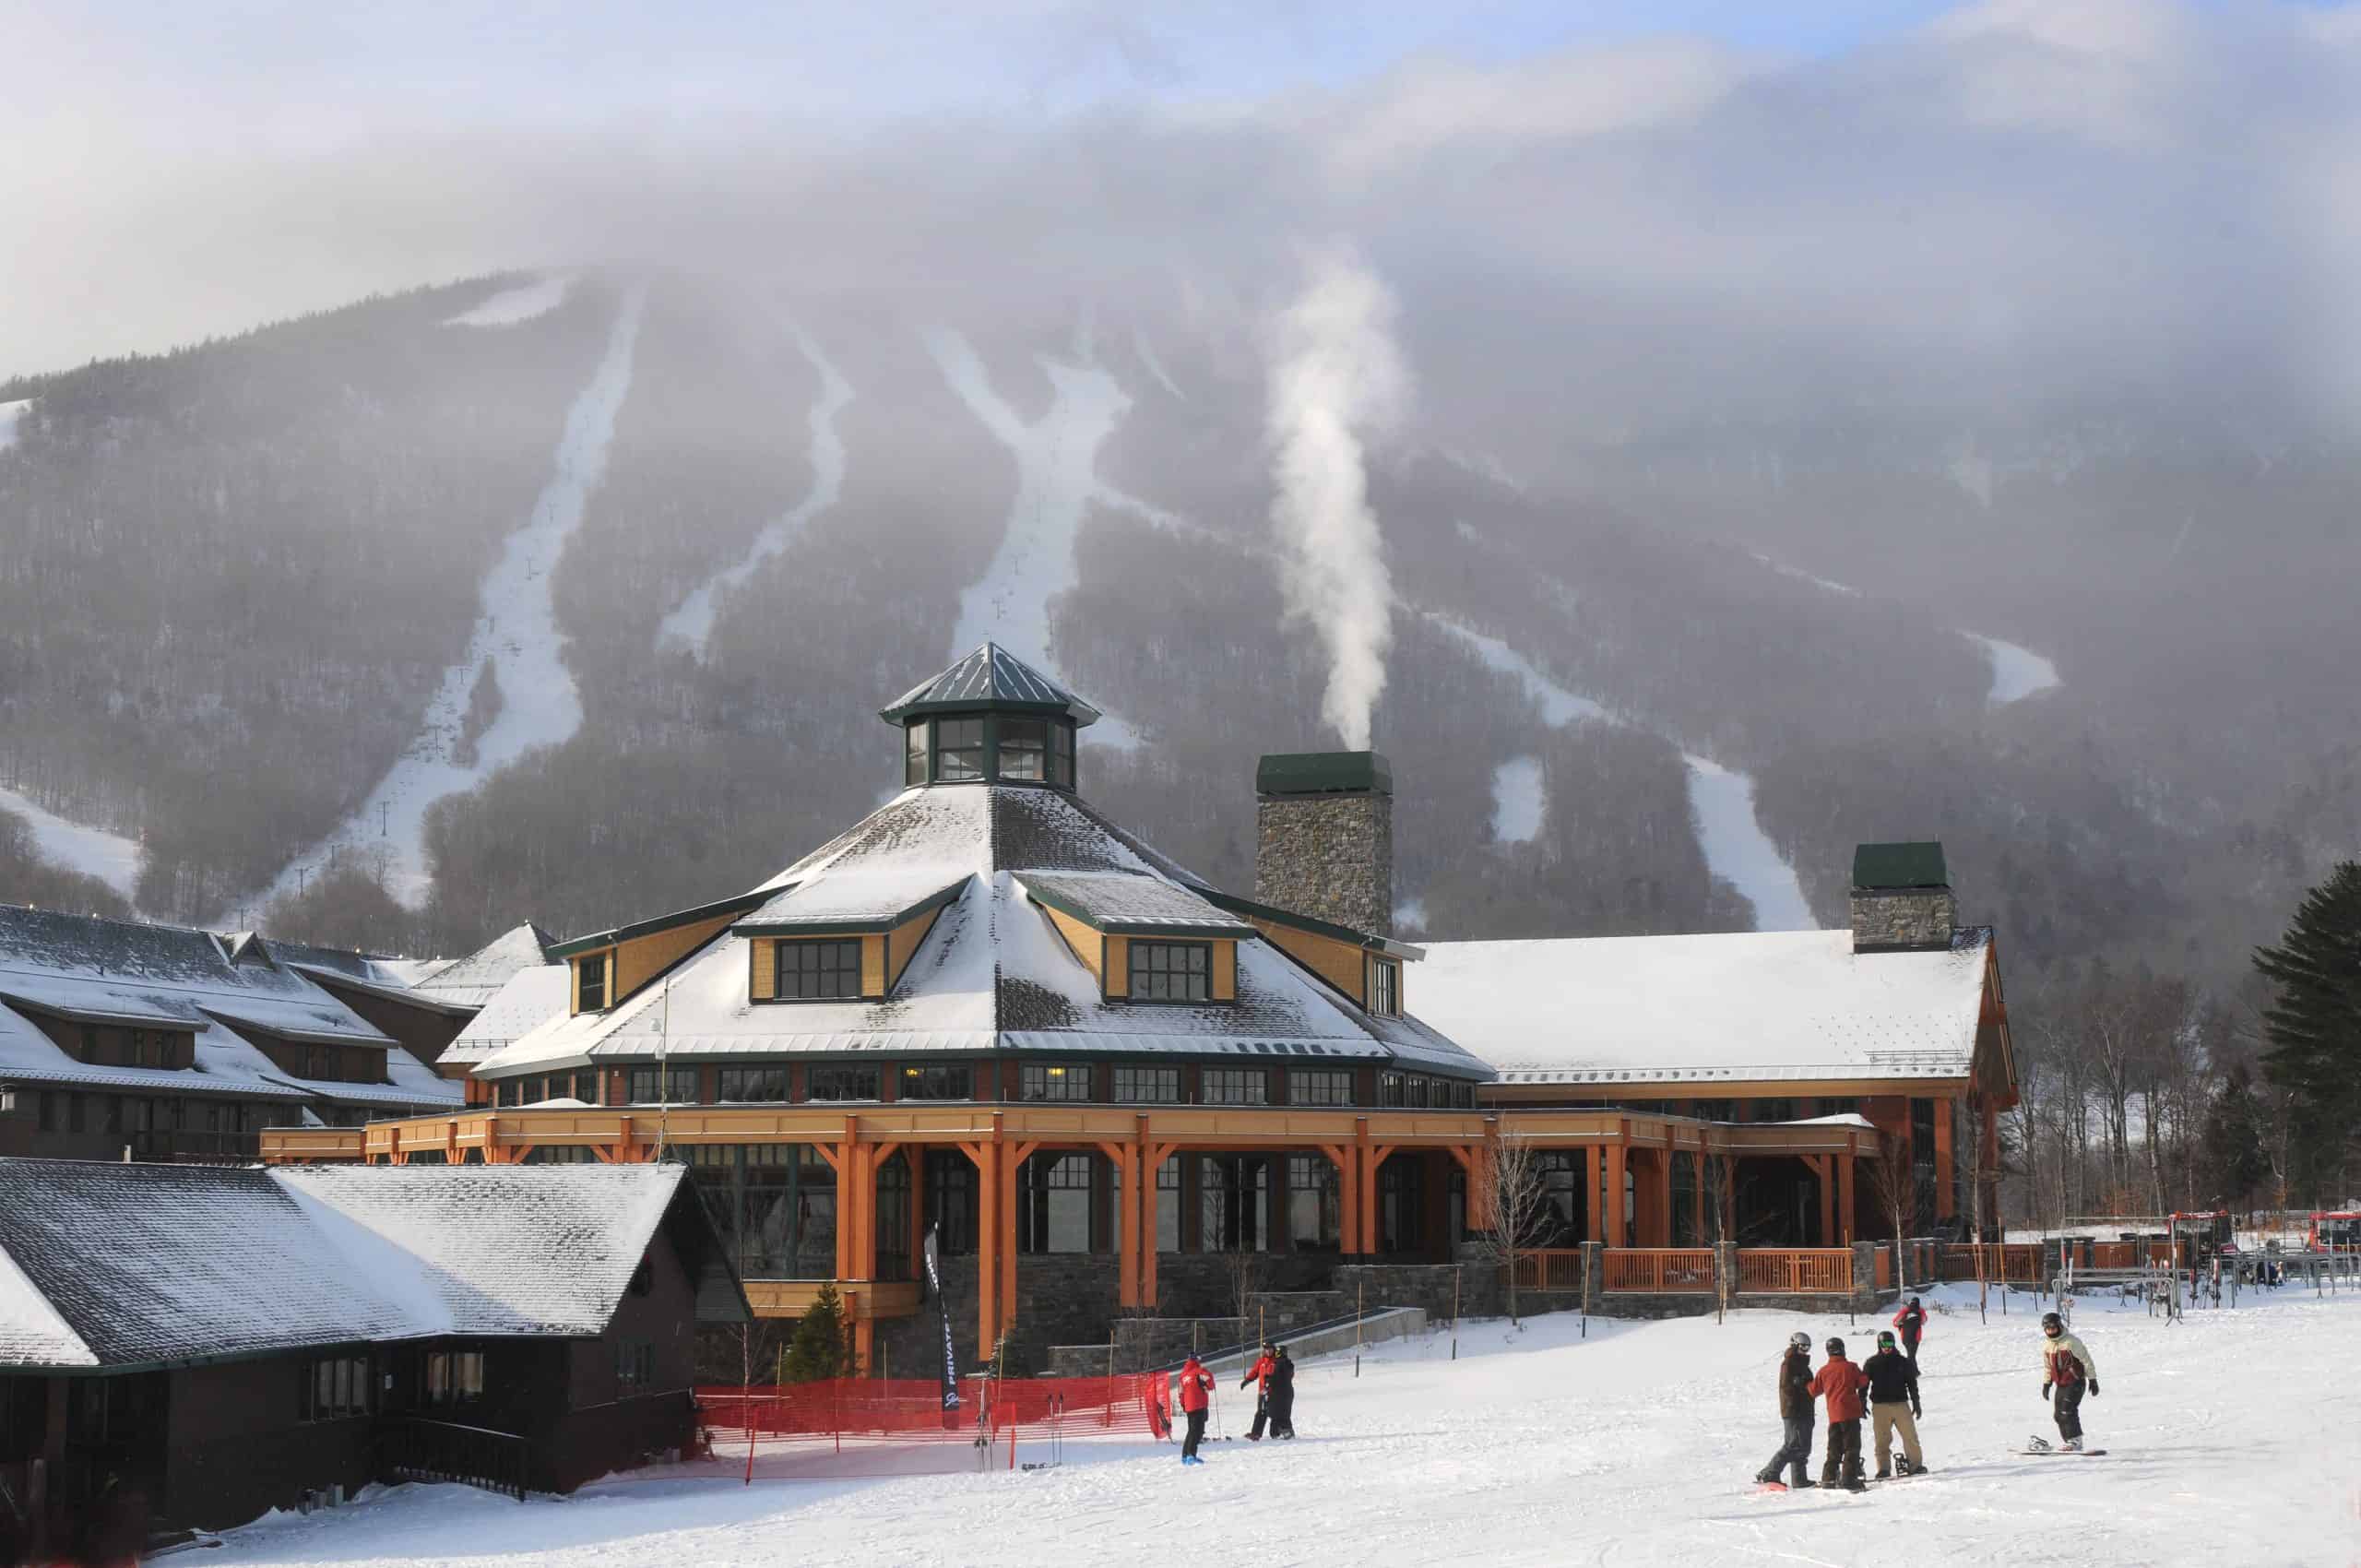 Stowe Mountain Resort Base Lodge Skiing and Snowboarding in the Winter